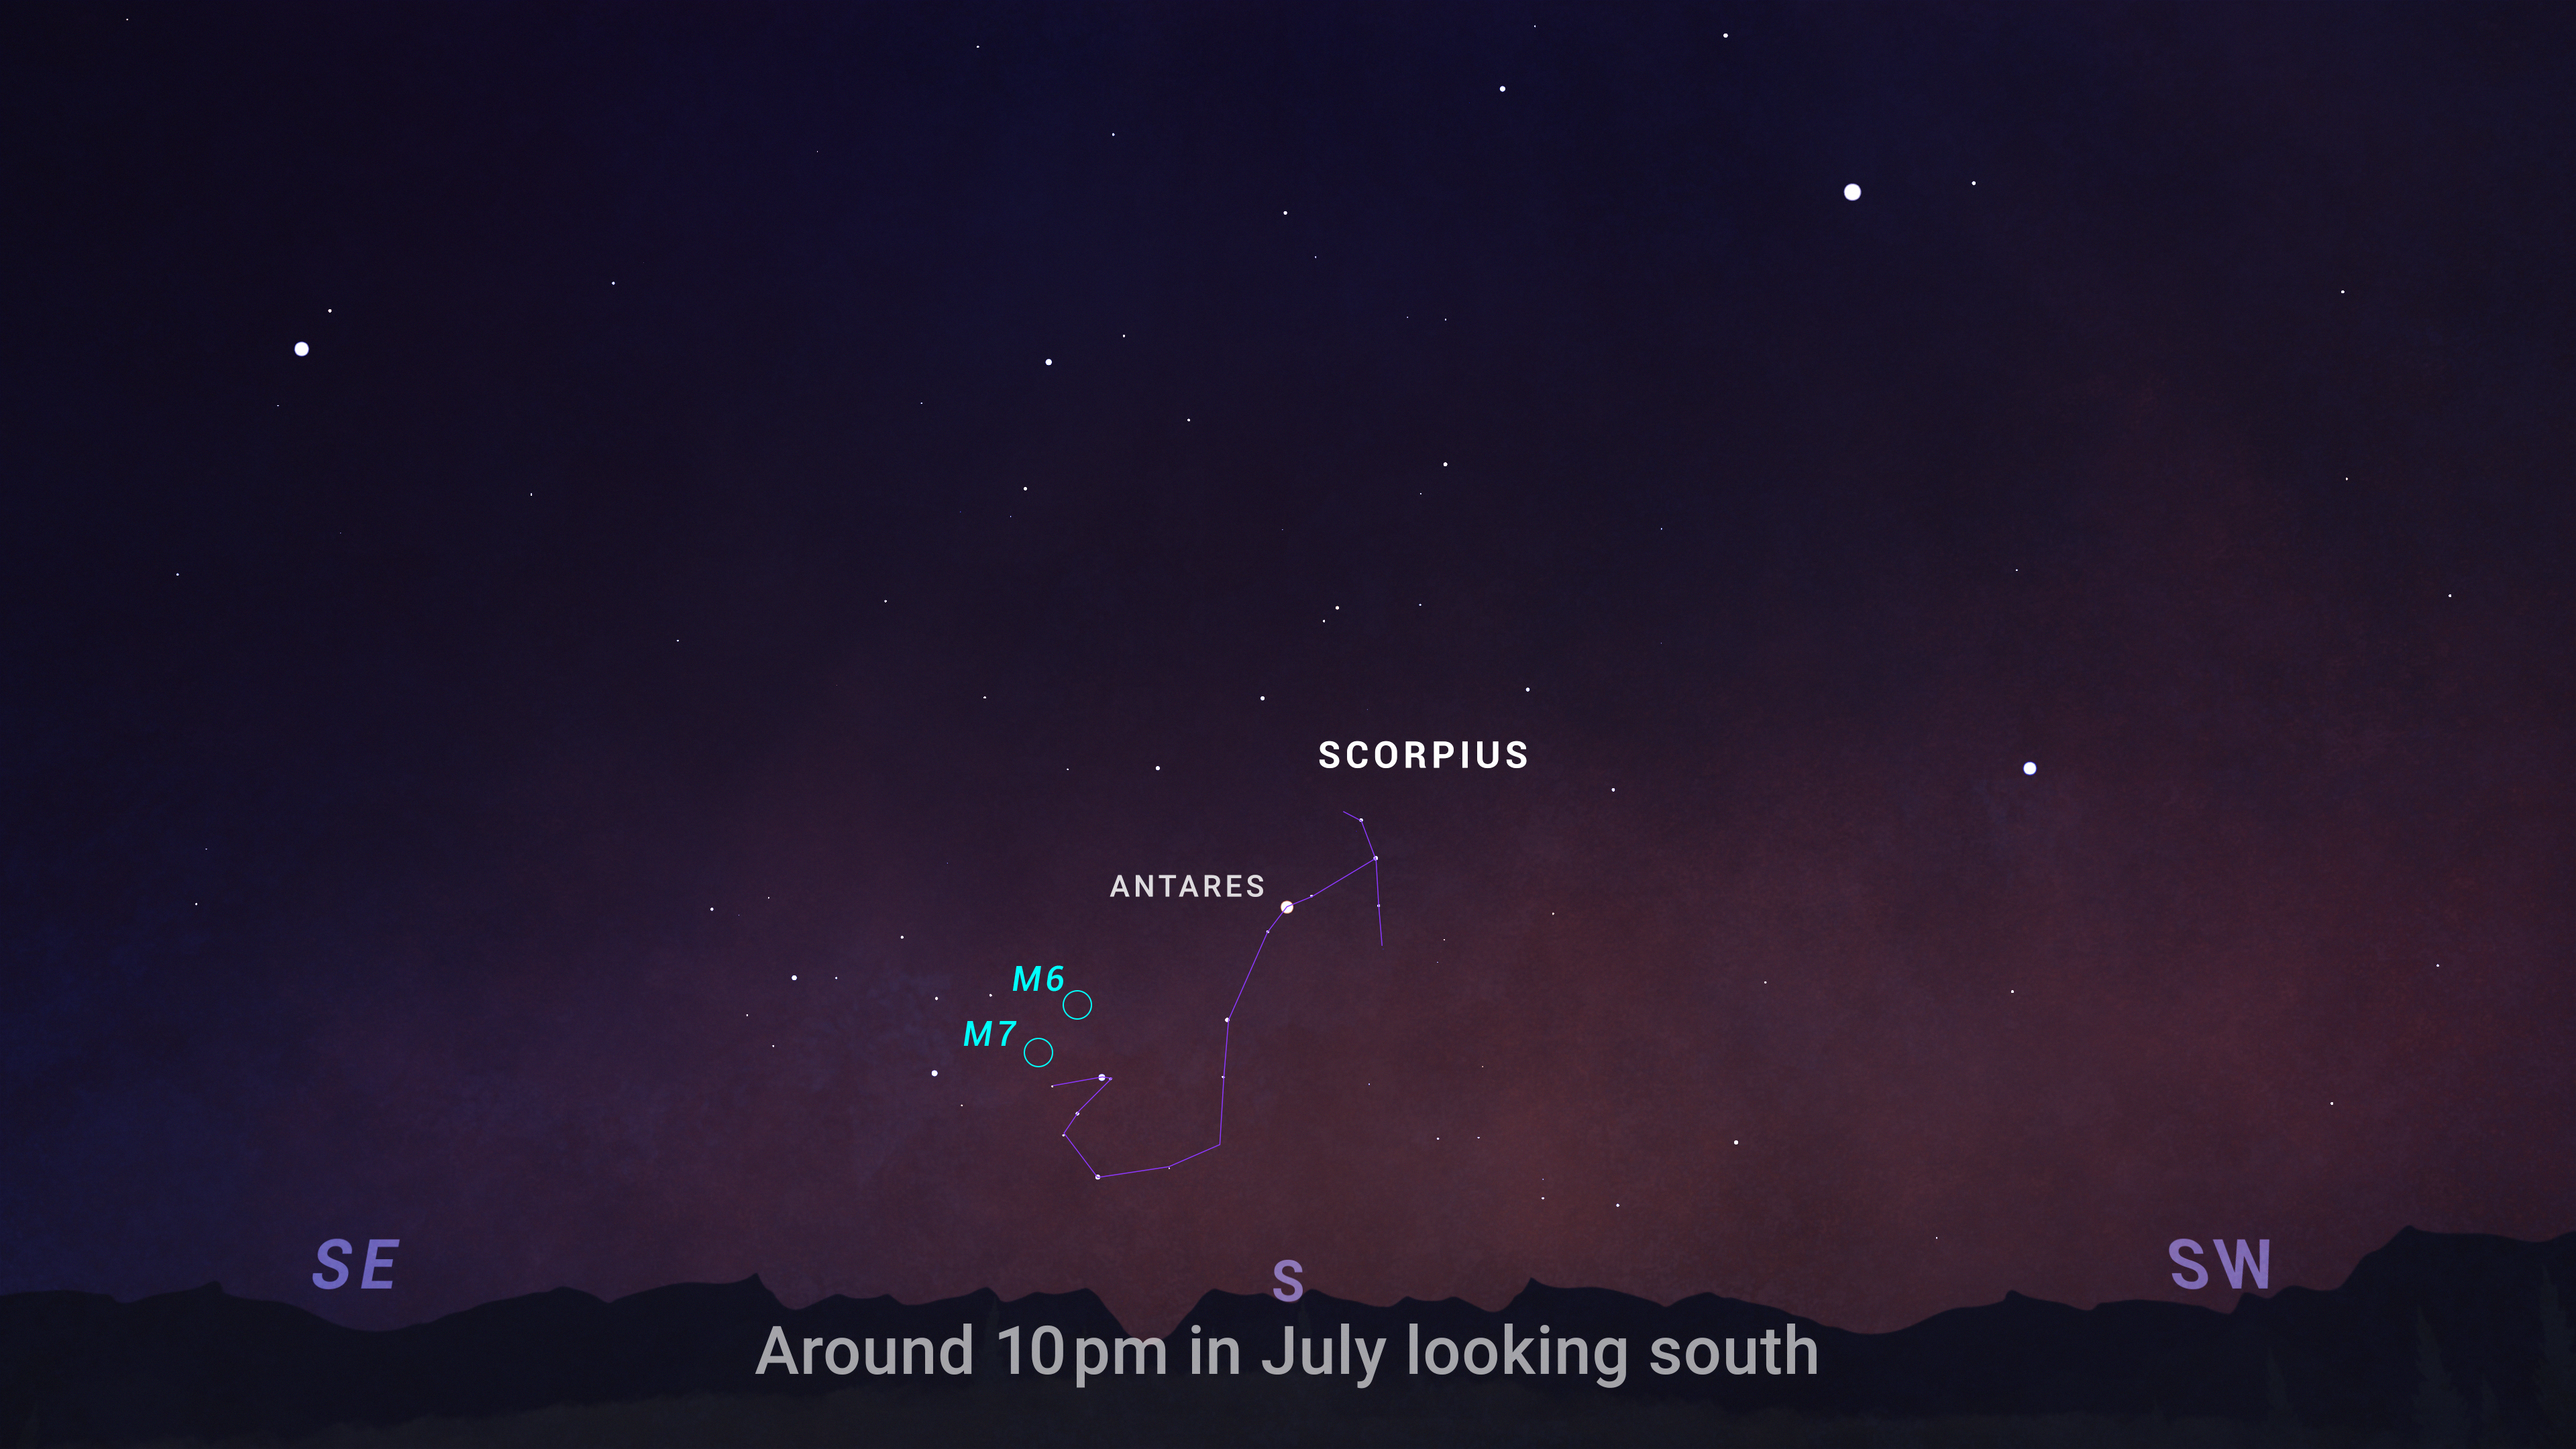 An illustrated sky chart shows the stars in Scorpius linked by lines to form the scorpion shape of the constellation. Bright star Antares is labeled in the upper part of the constellation. M6 and M7 are indicated by circled inscribed around their positions on the sky.